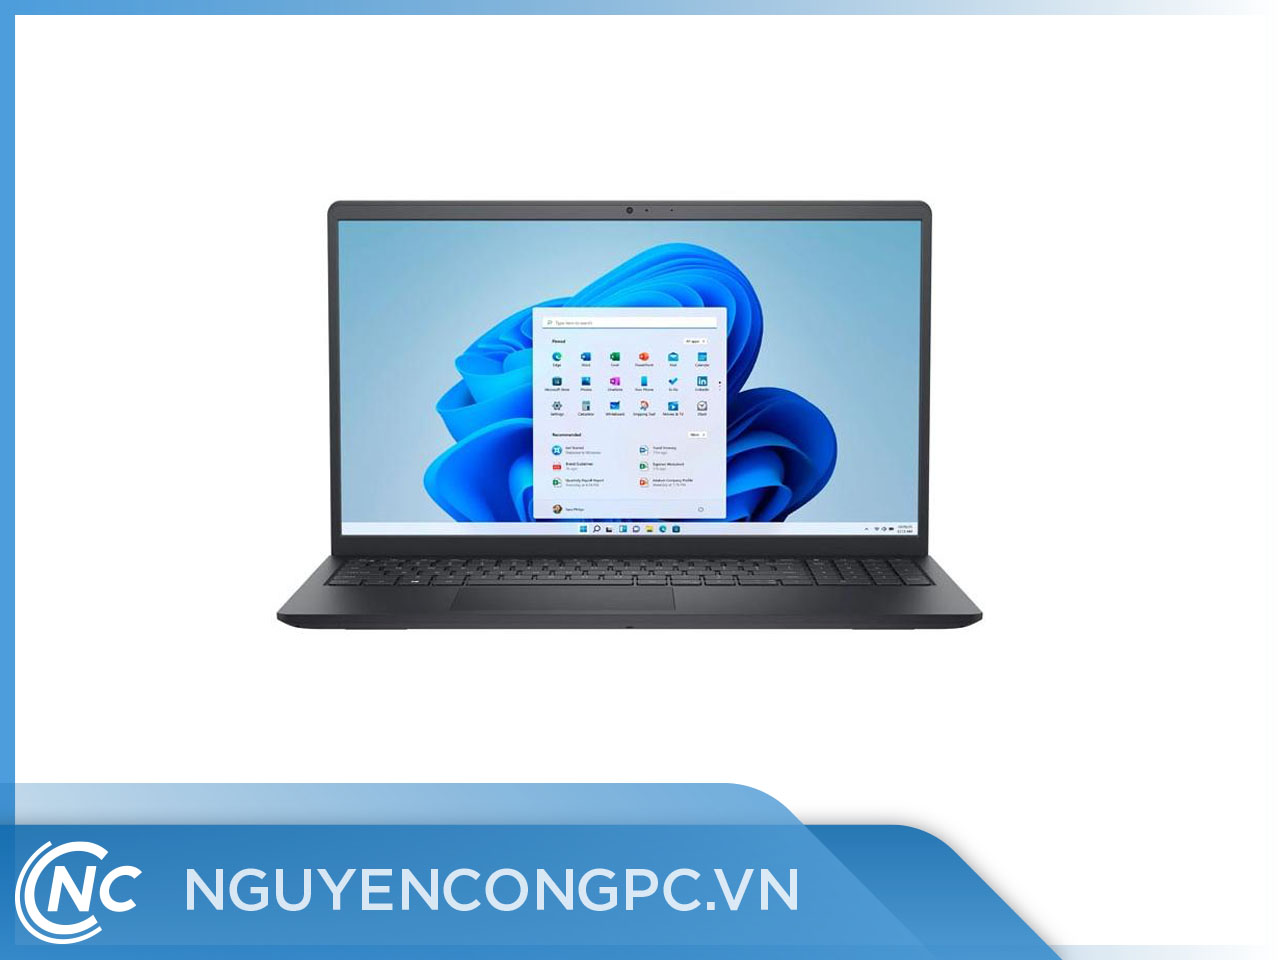 Laptop Dell Inspiron 3511 5101BLK | Nguyễn Công PC